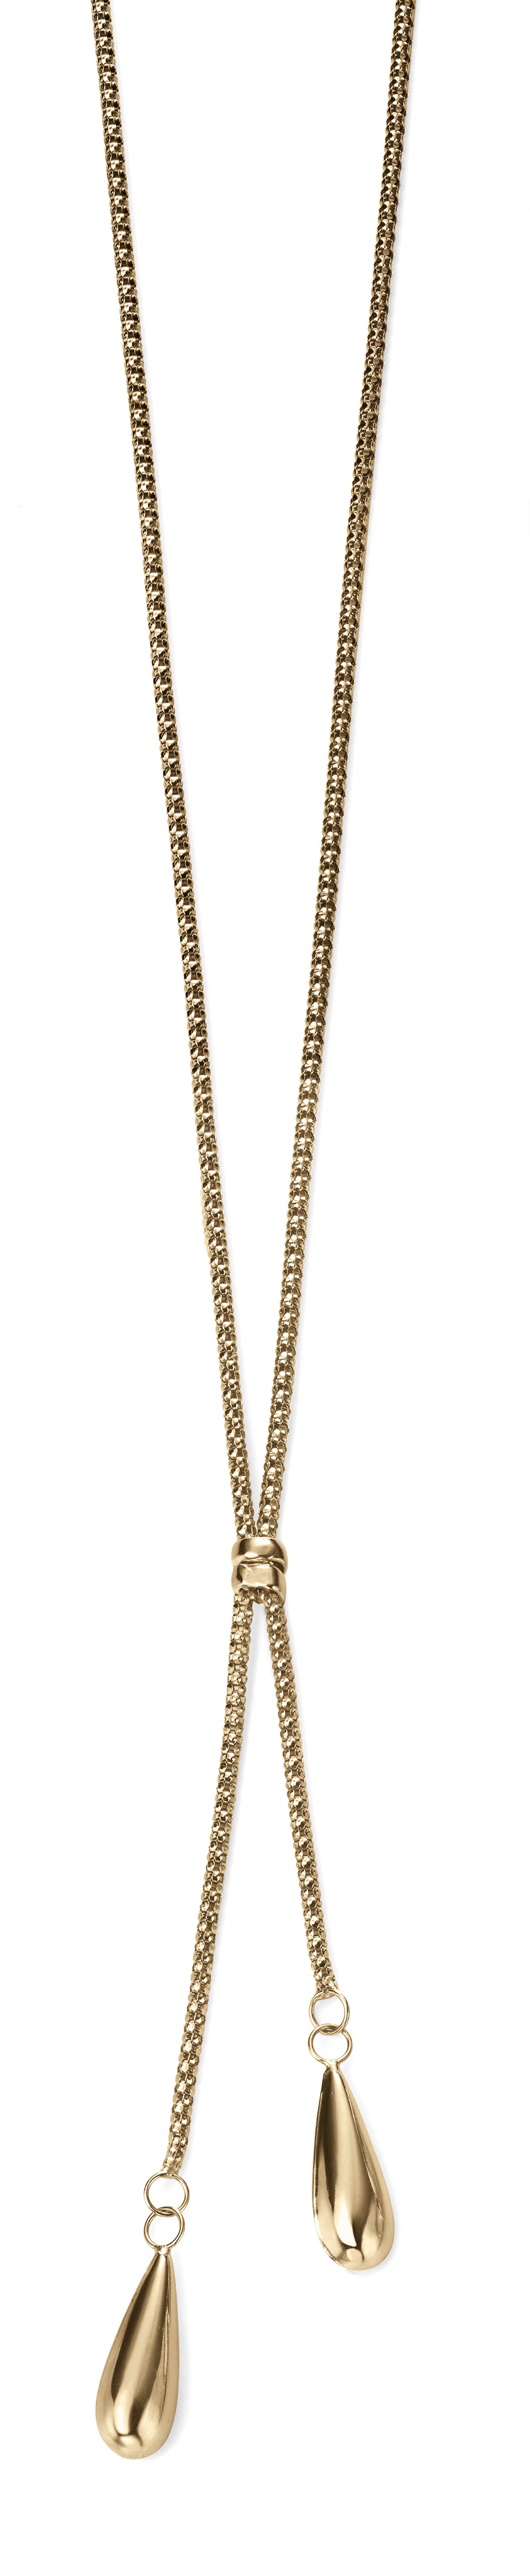 9ct Yellow Gold Double Teardrop Necklace